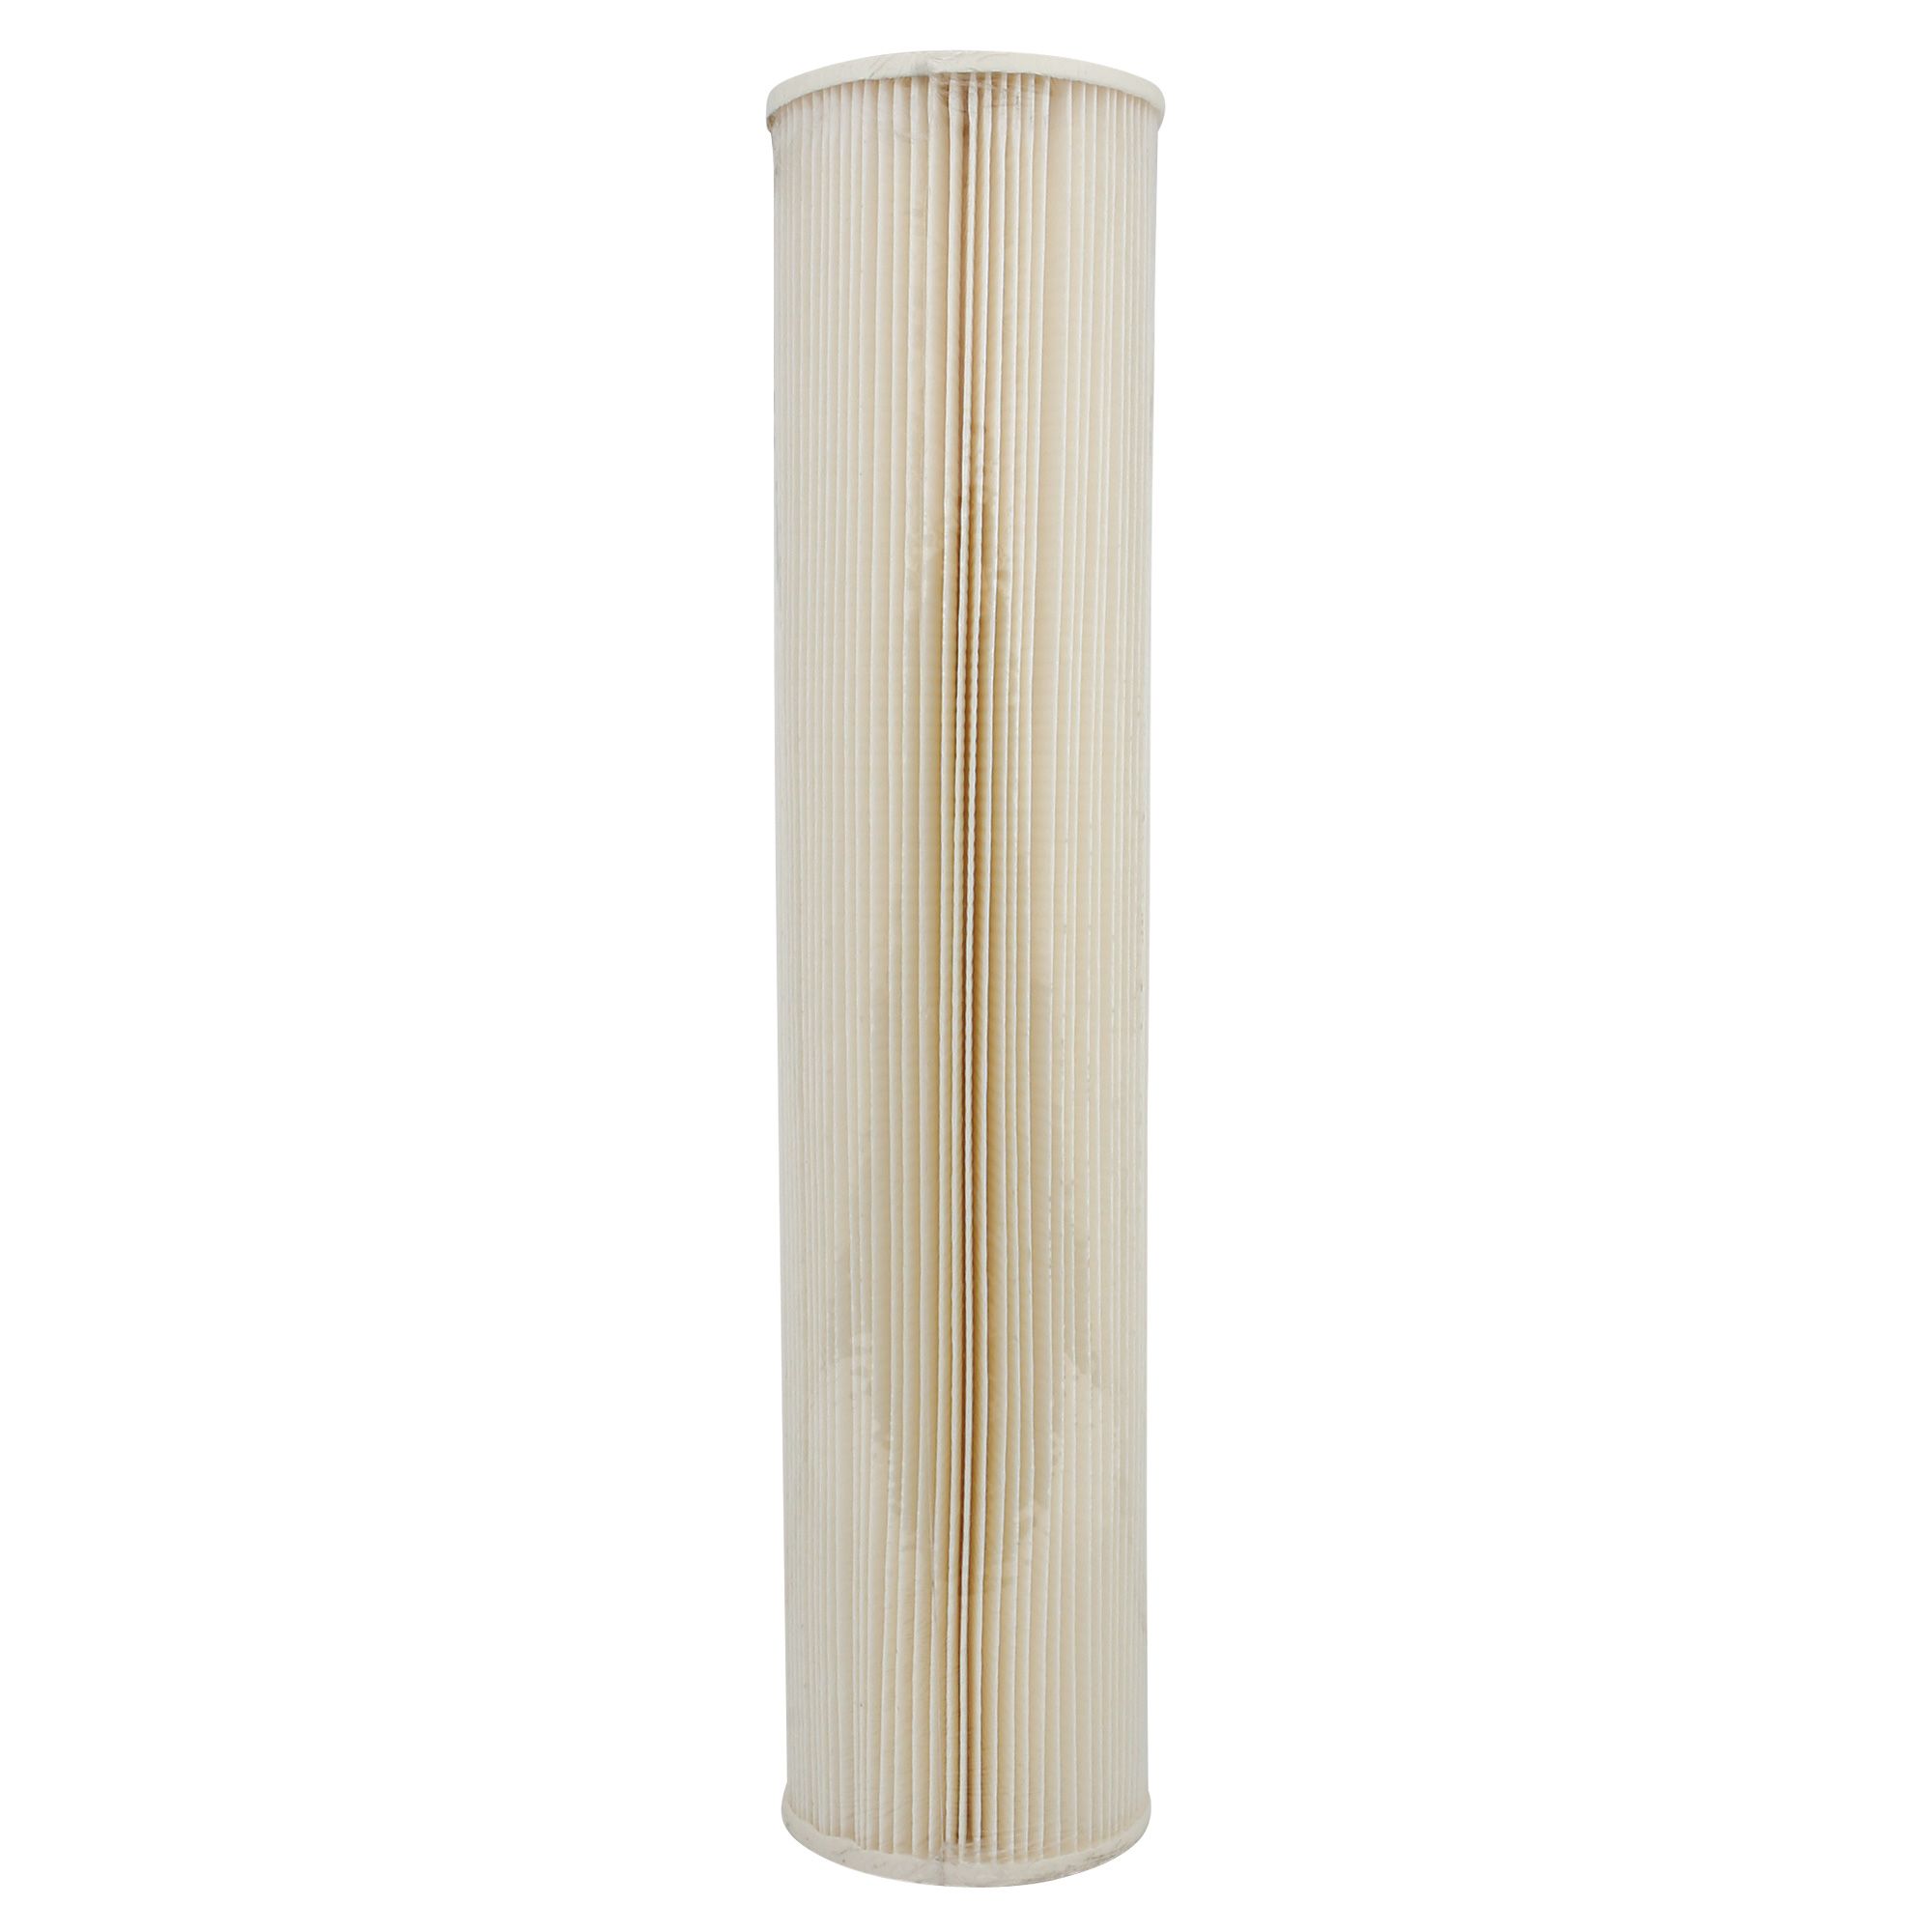 Cellulose/Polyester Blend Filter Media 12.74 OD Clean Air America 5420 and 2794 OEM Replacement Cartridge Filter 26 Length 